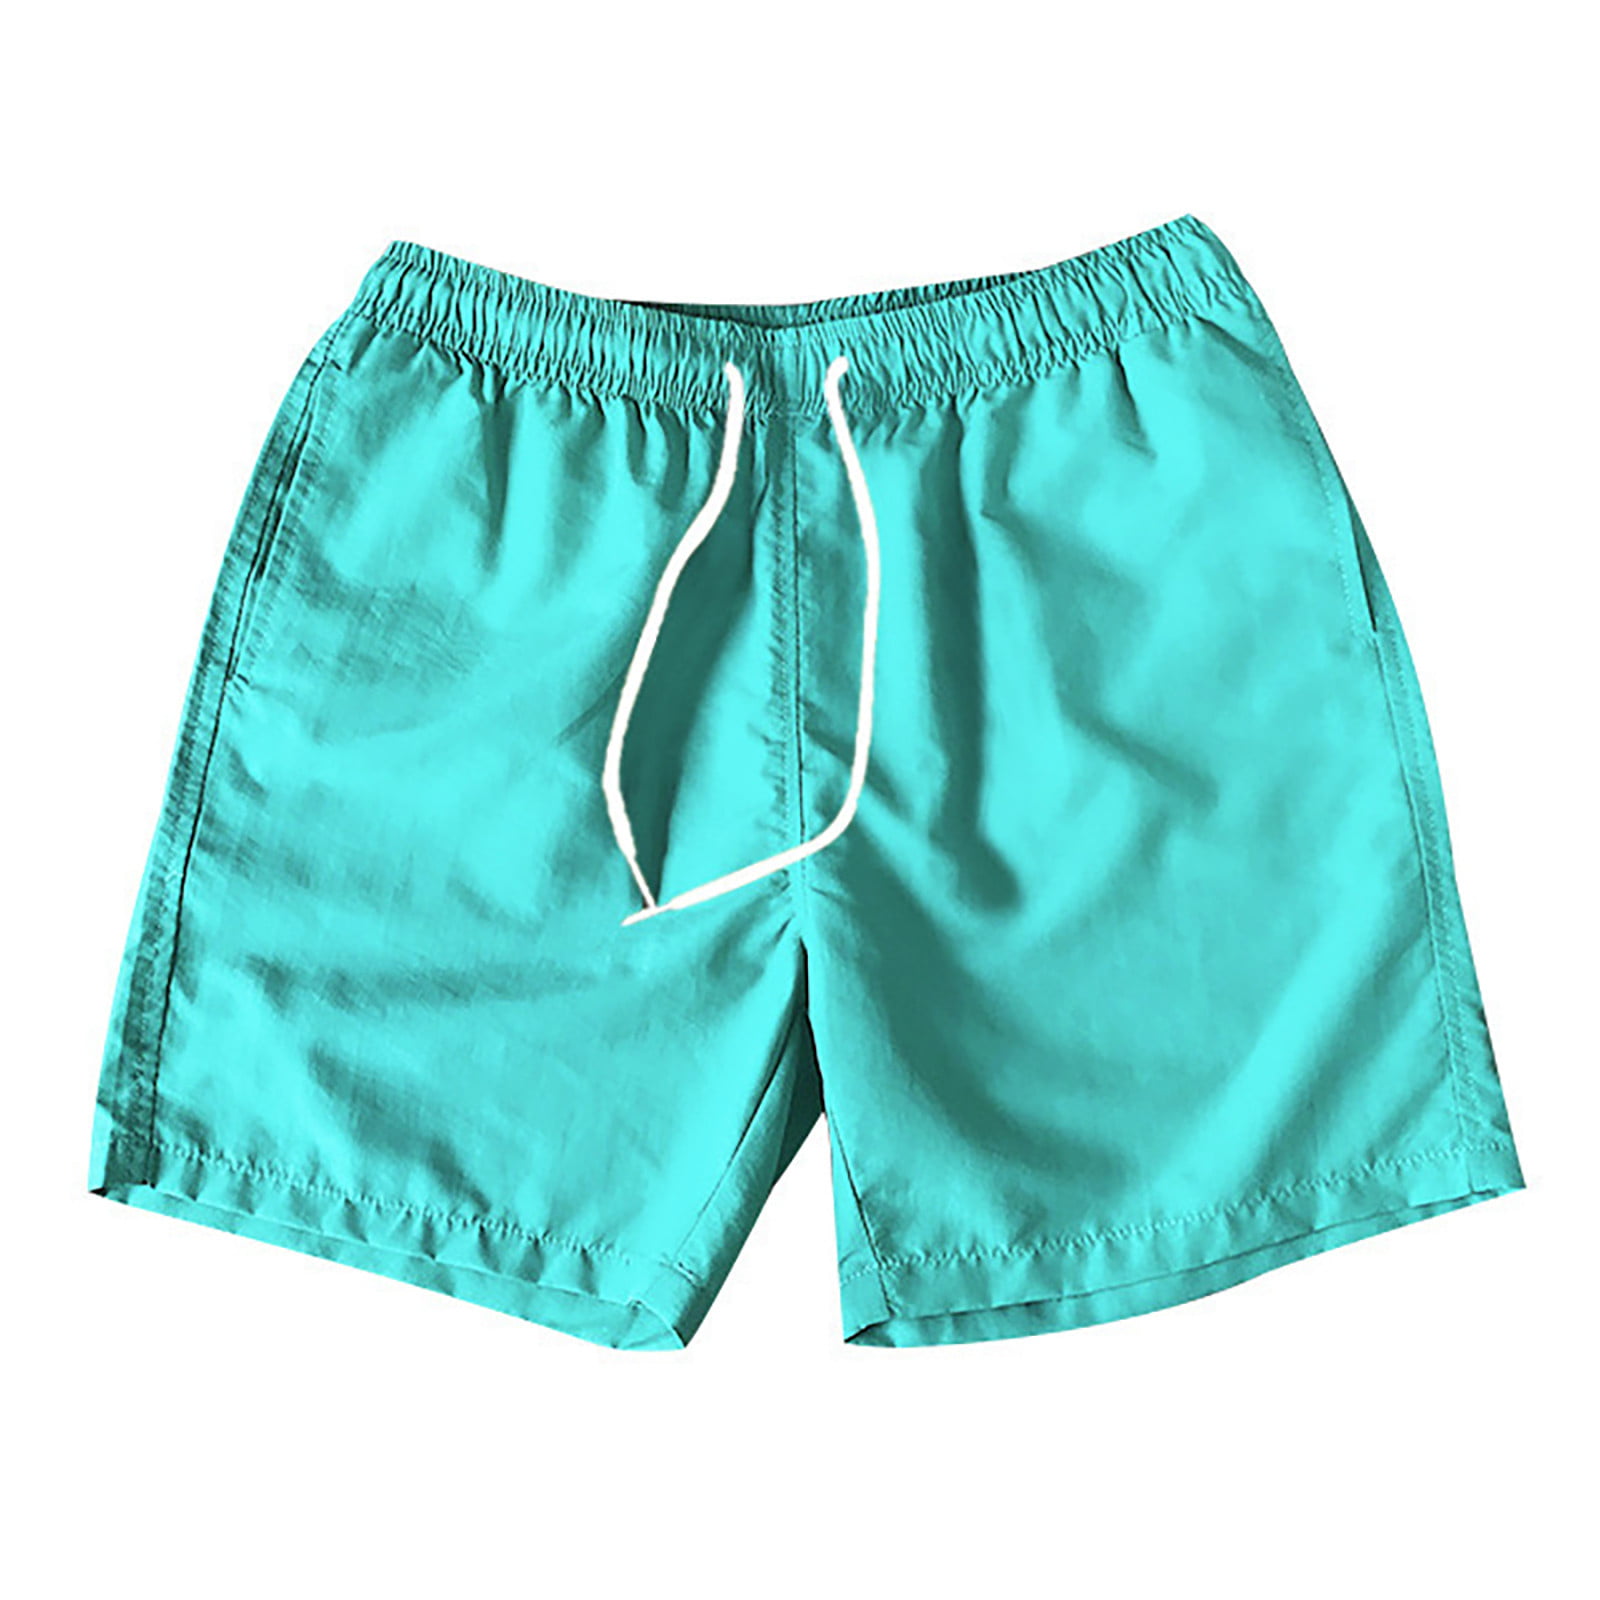 Shorts for Men 5 inch Solid Color Beach Fitness Elastic Waistband Short  with Pockets Quick Dry Activewear Inseam Running Gym Shorts